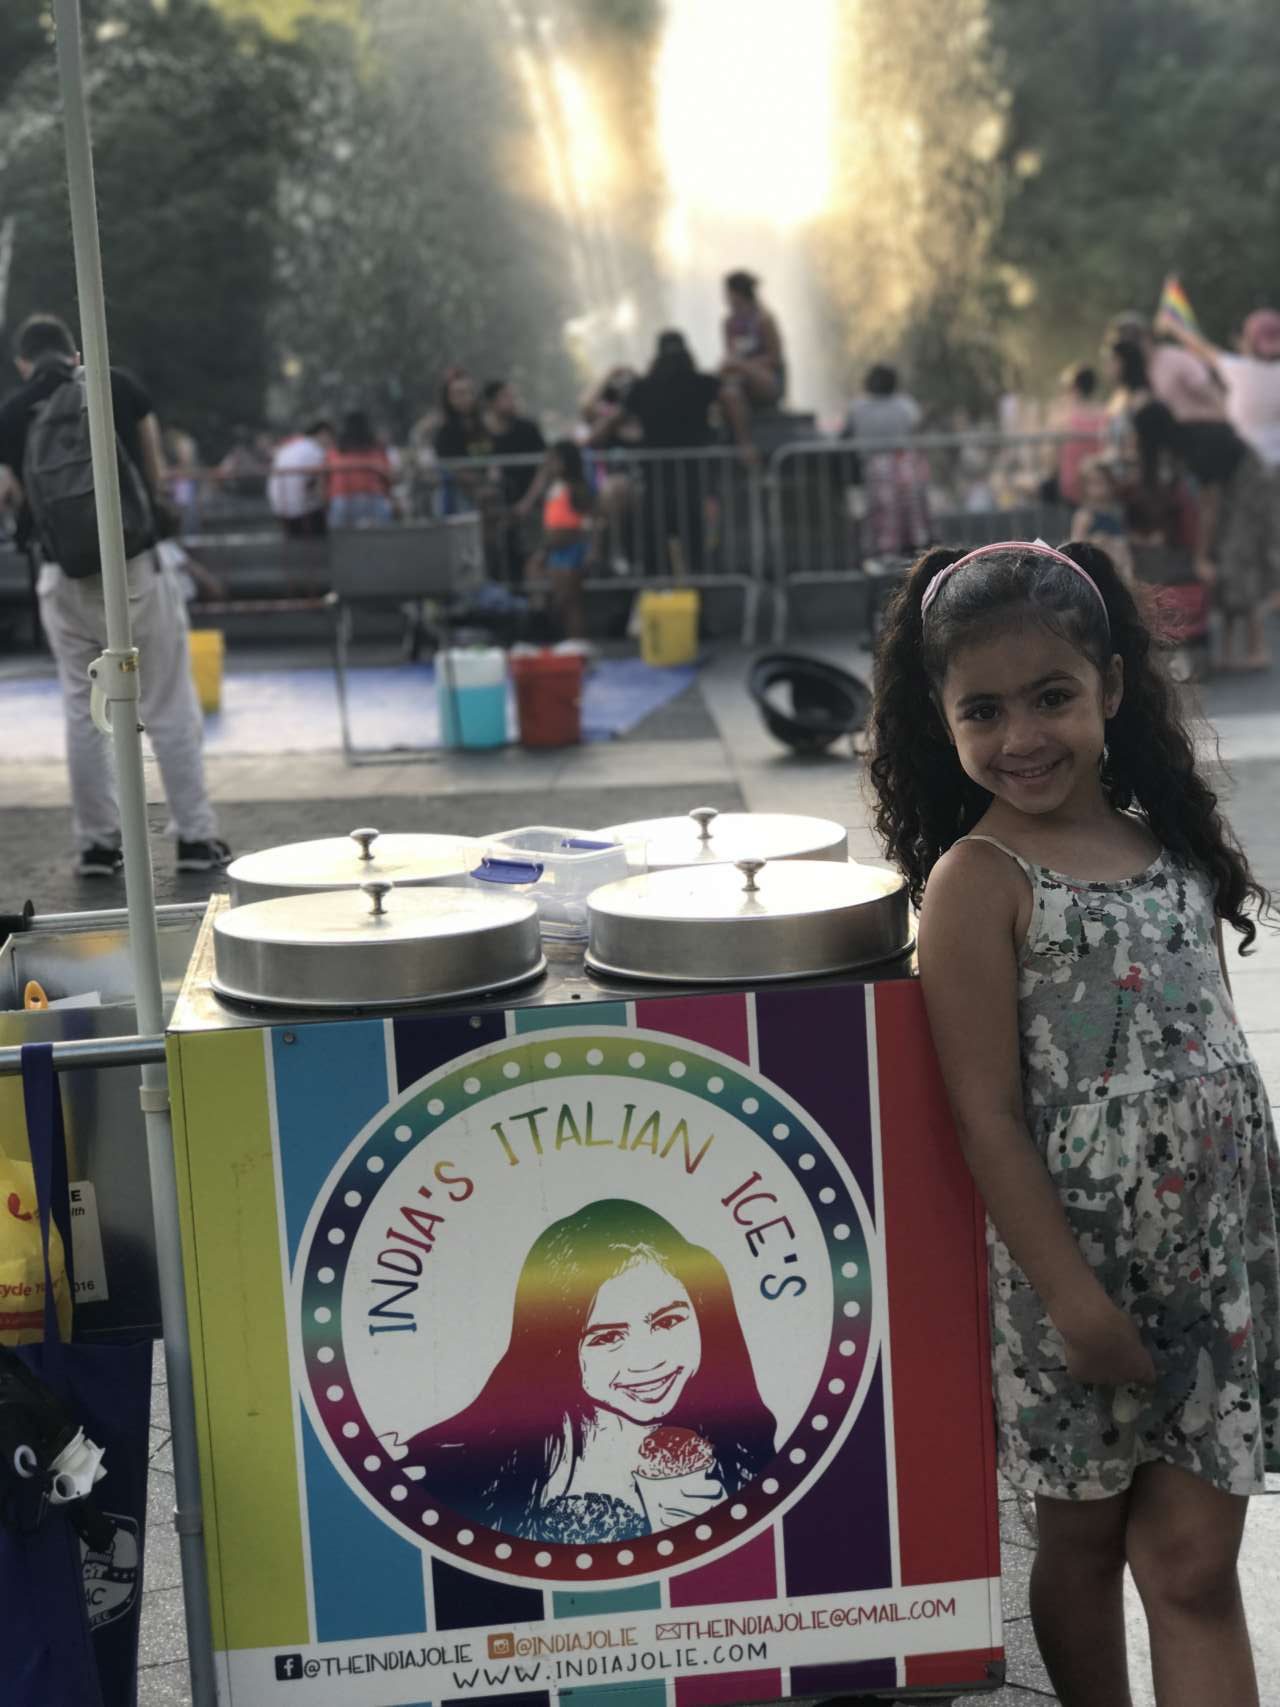 girl India Jolie in printed dress standing next to her rainbow Italian Ice cart in Washington Square Park